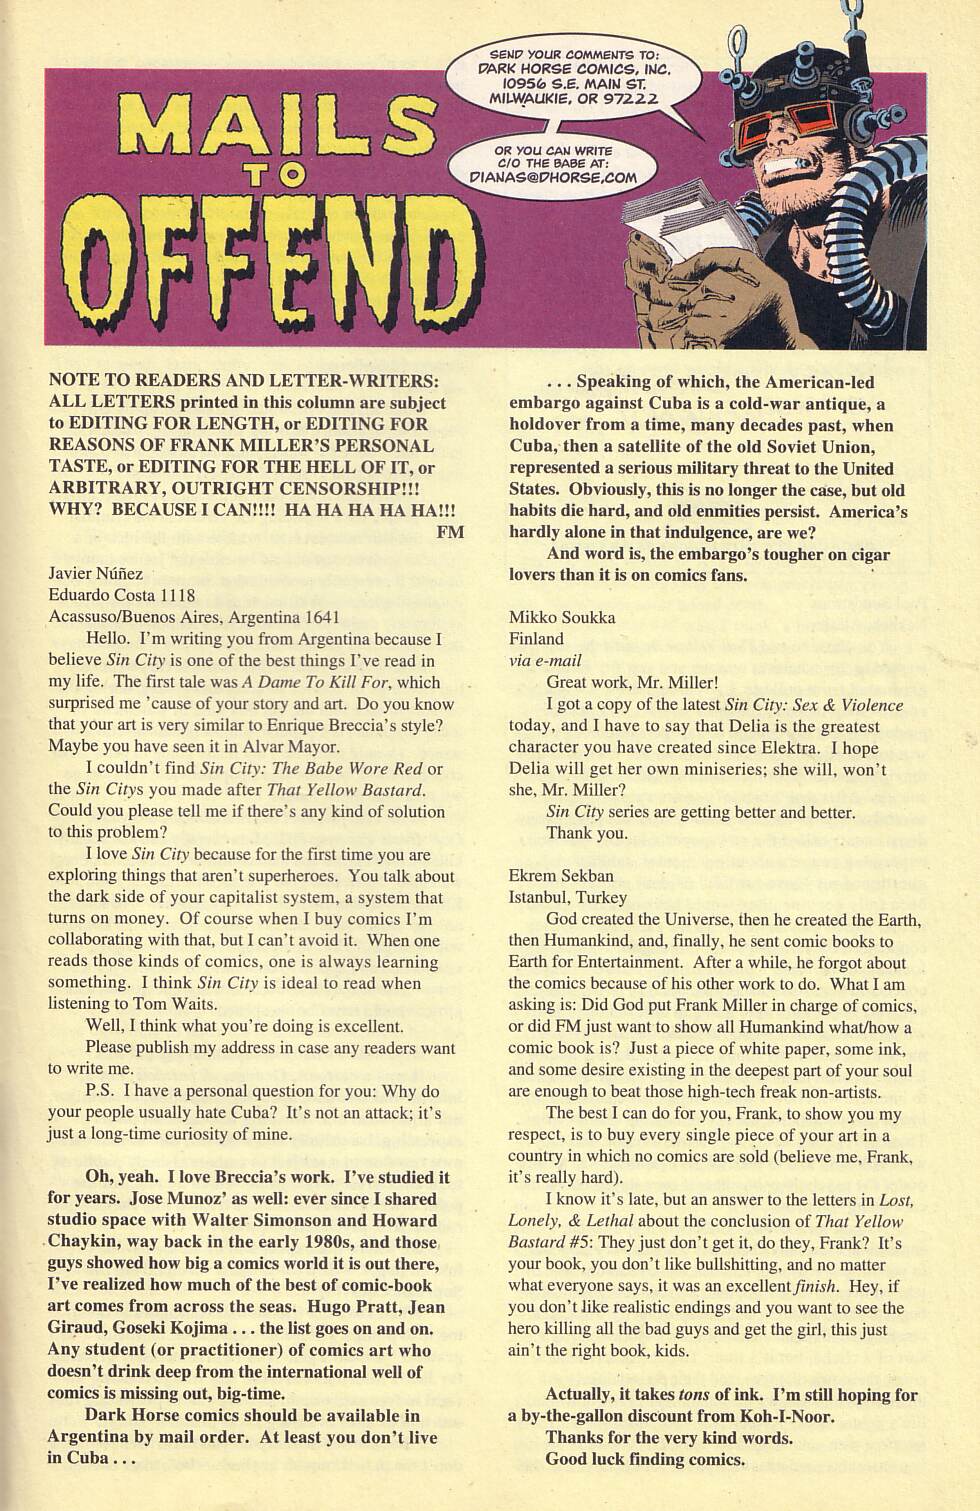 Read online Tales to Offend comic -  Issue # Full - 31